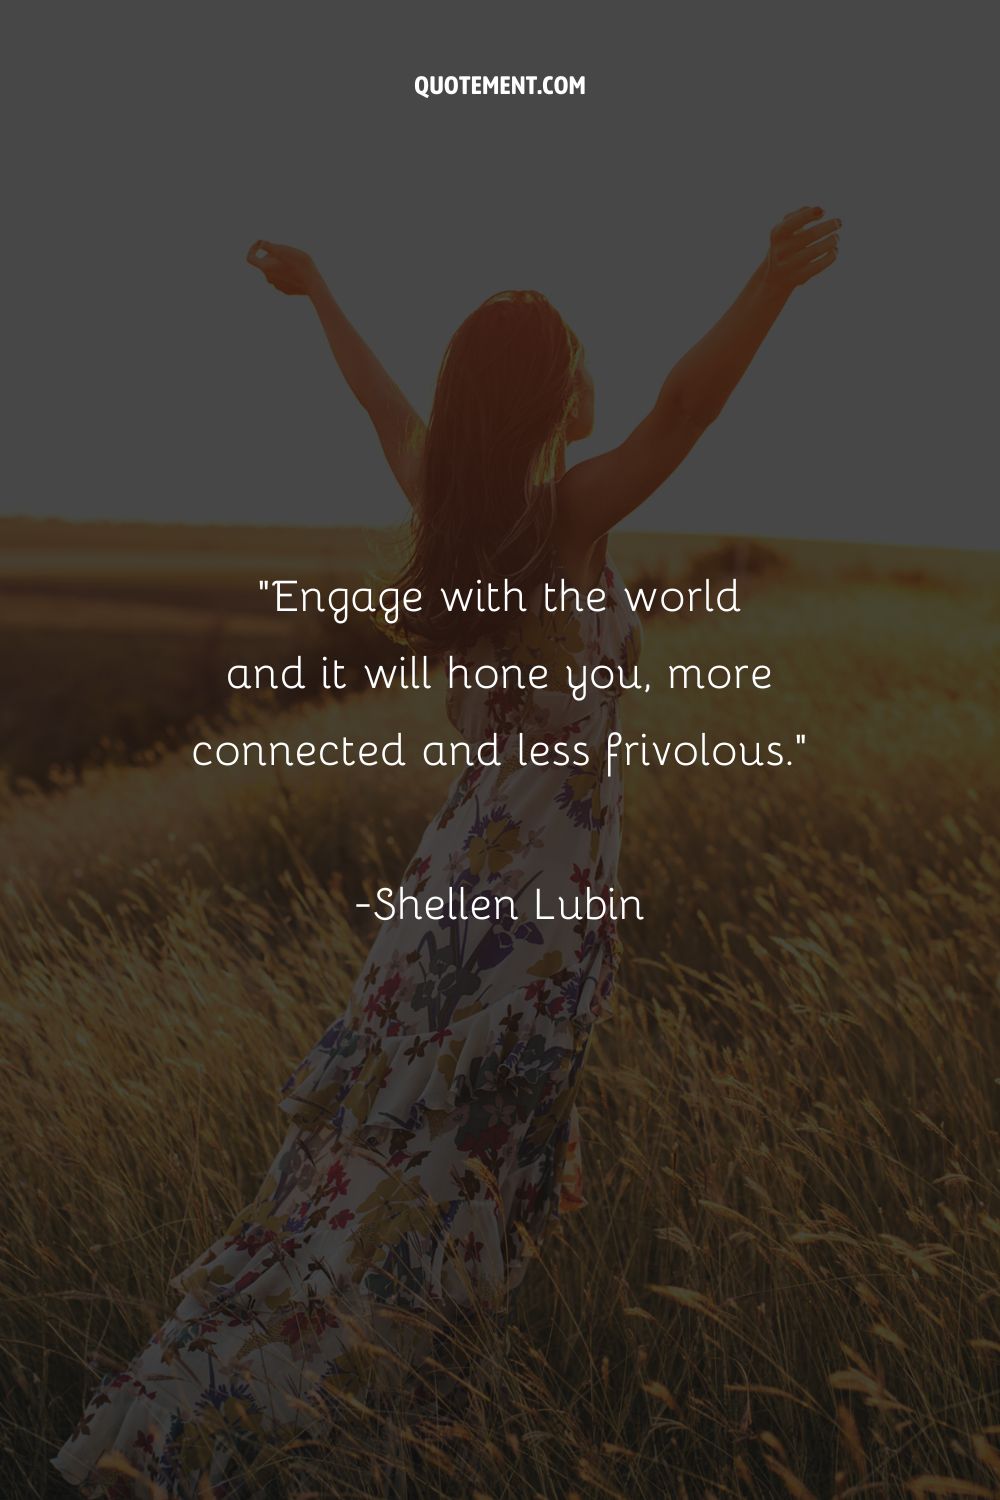 Engage with the world and it will hone you,